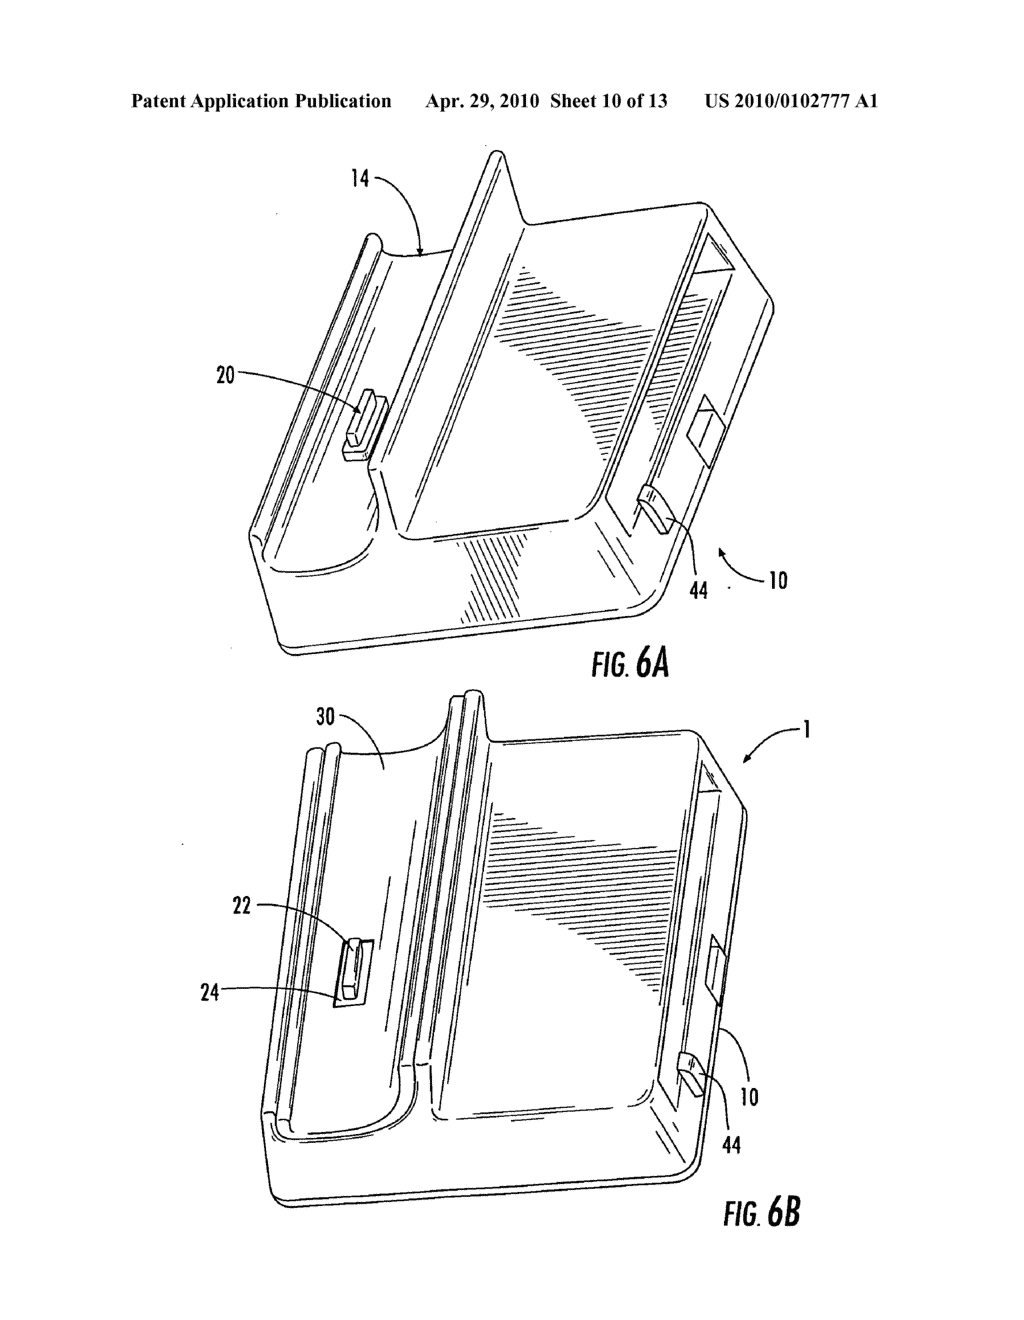 DOCKING CHARGER FOR CHARGING A HAND HELD ELECTRONIC DEVICE WITH OR WITHOUT A PROTECTIVE COVER CASE FITTED THEREON - diagram, schematic, and image 11